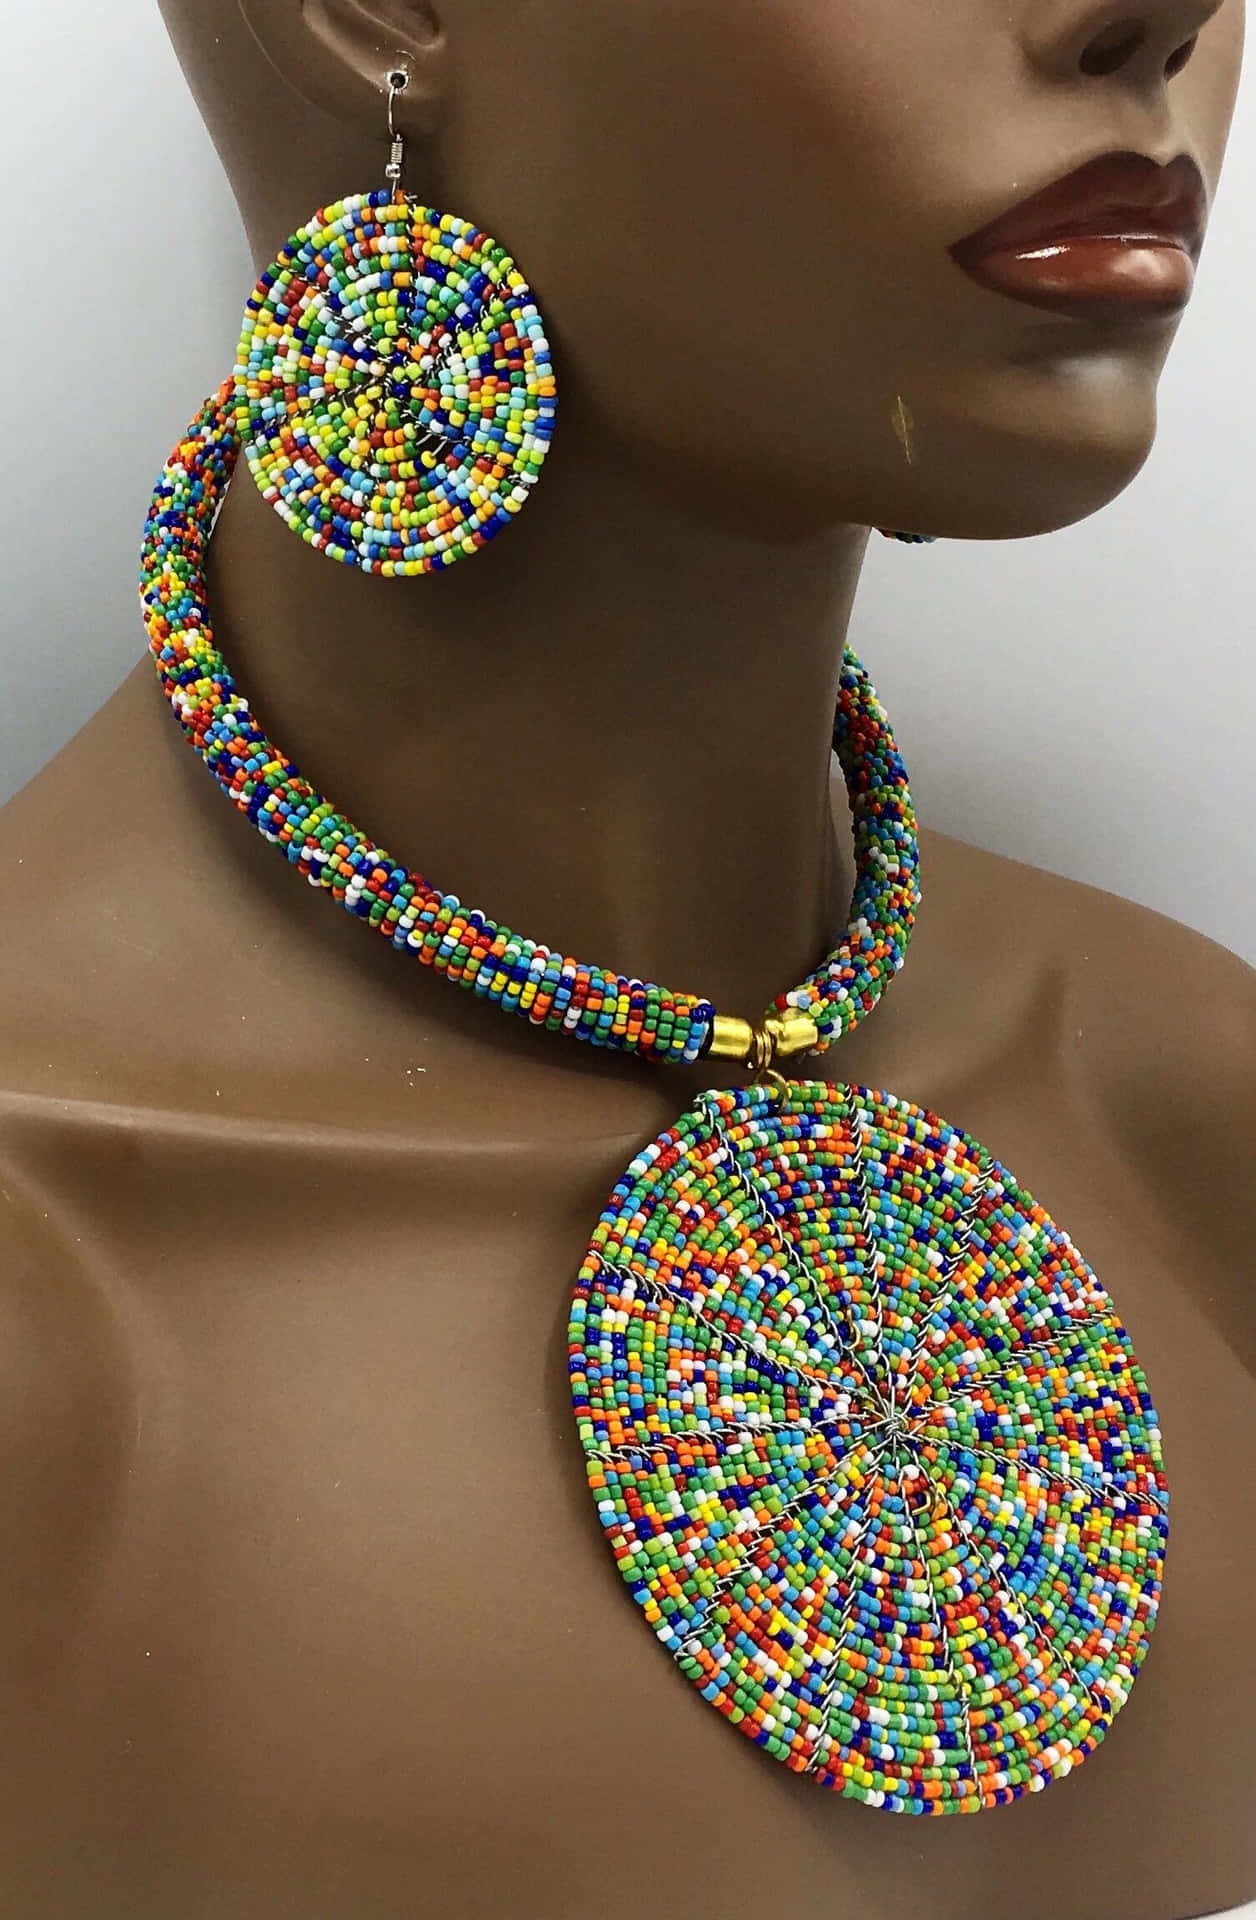 Be Unique with a Strand of Beads